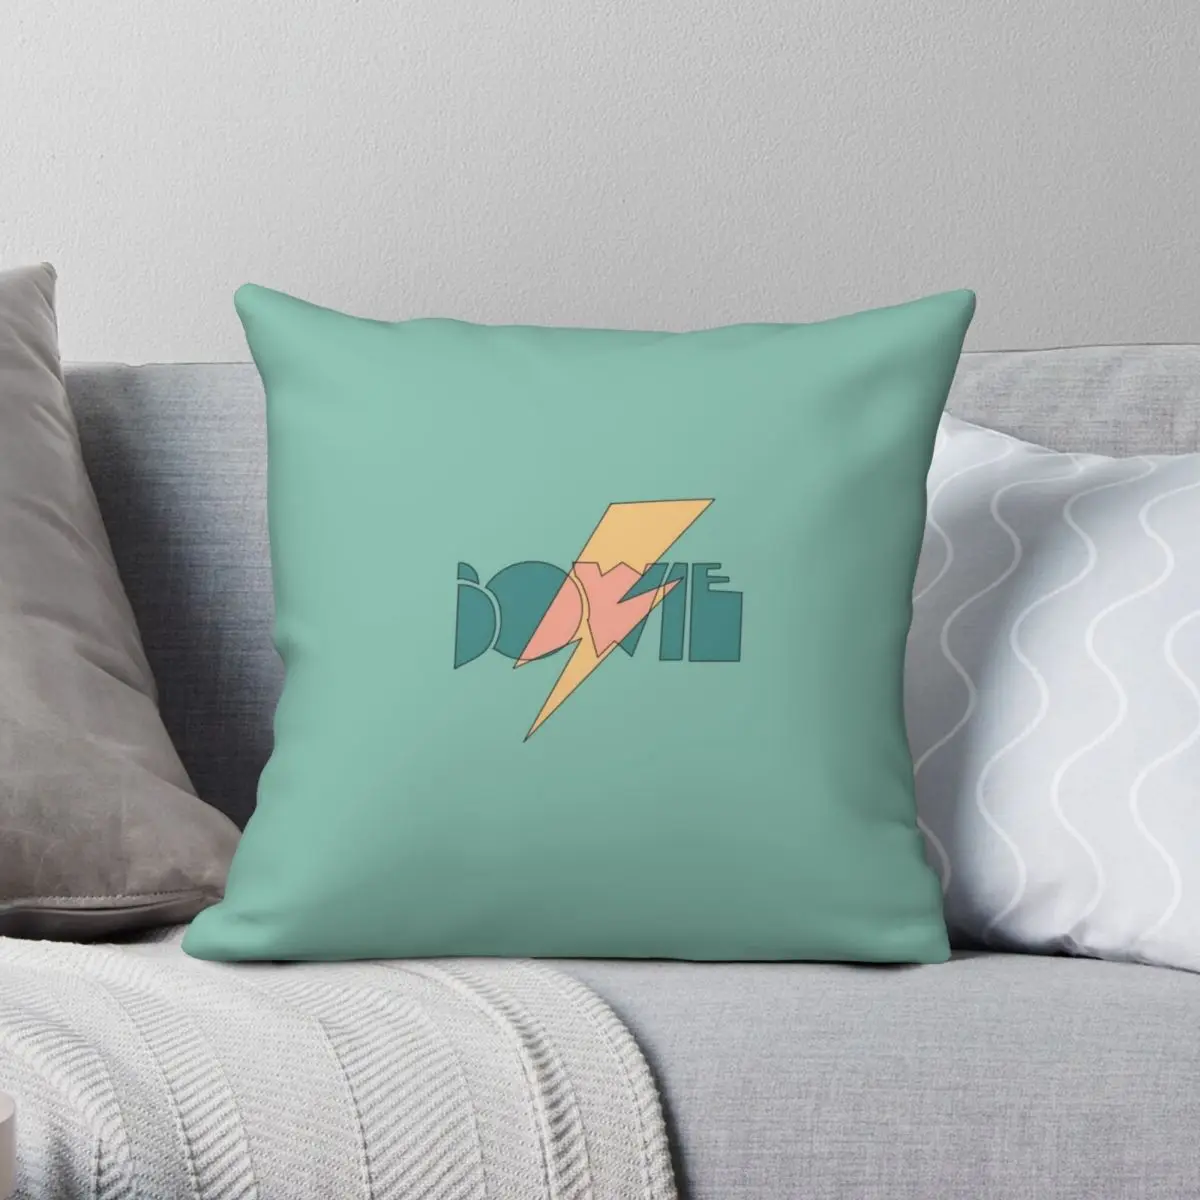 

Bowie Square Pillowcase Polyester Linen Velvet Printed Zip Decor Throw Pillow Case Bed Cushion Cover